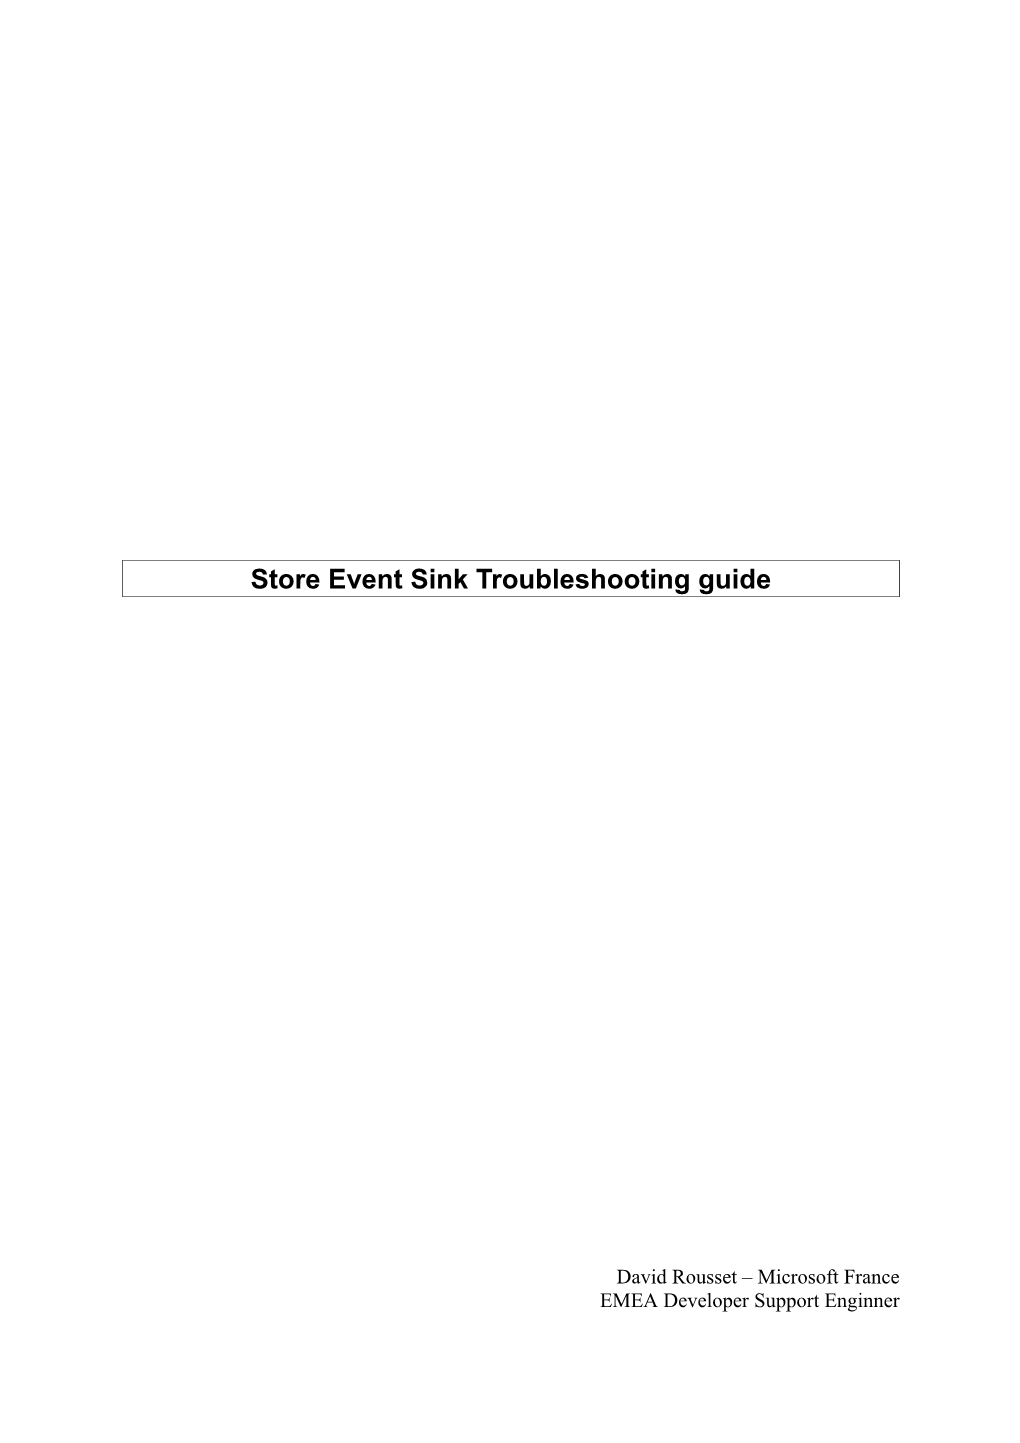 Store Event Sink Troubleshoot Guide